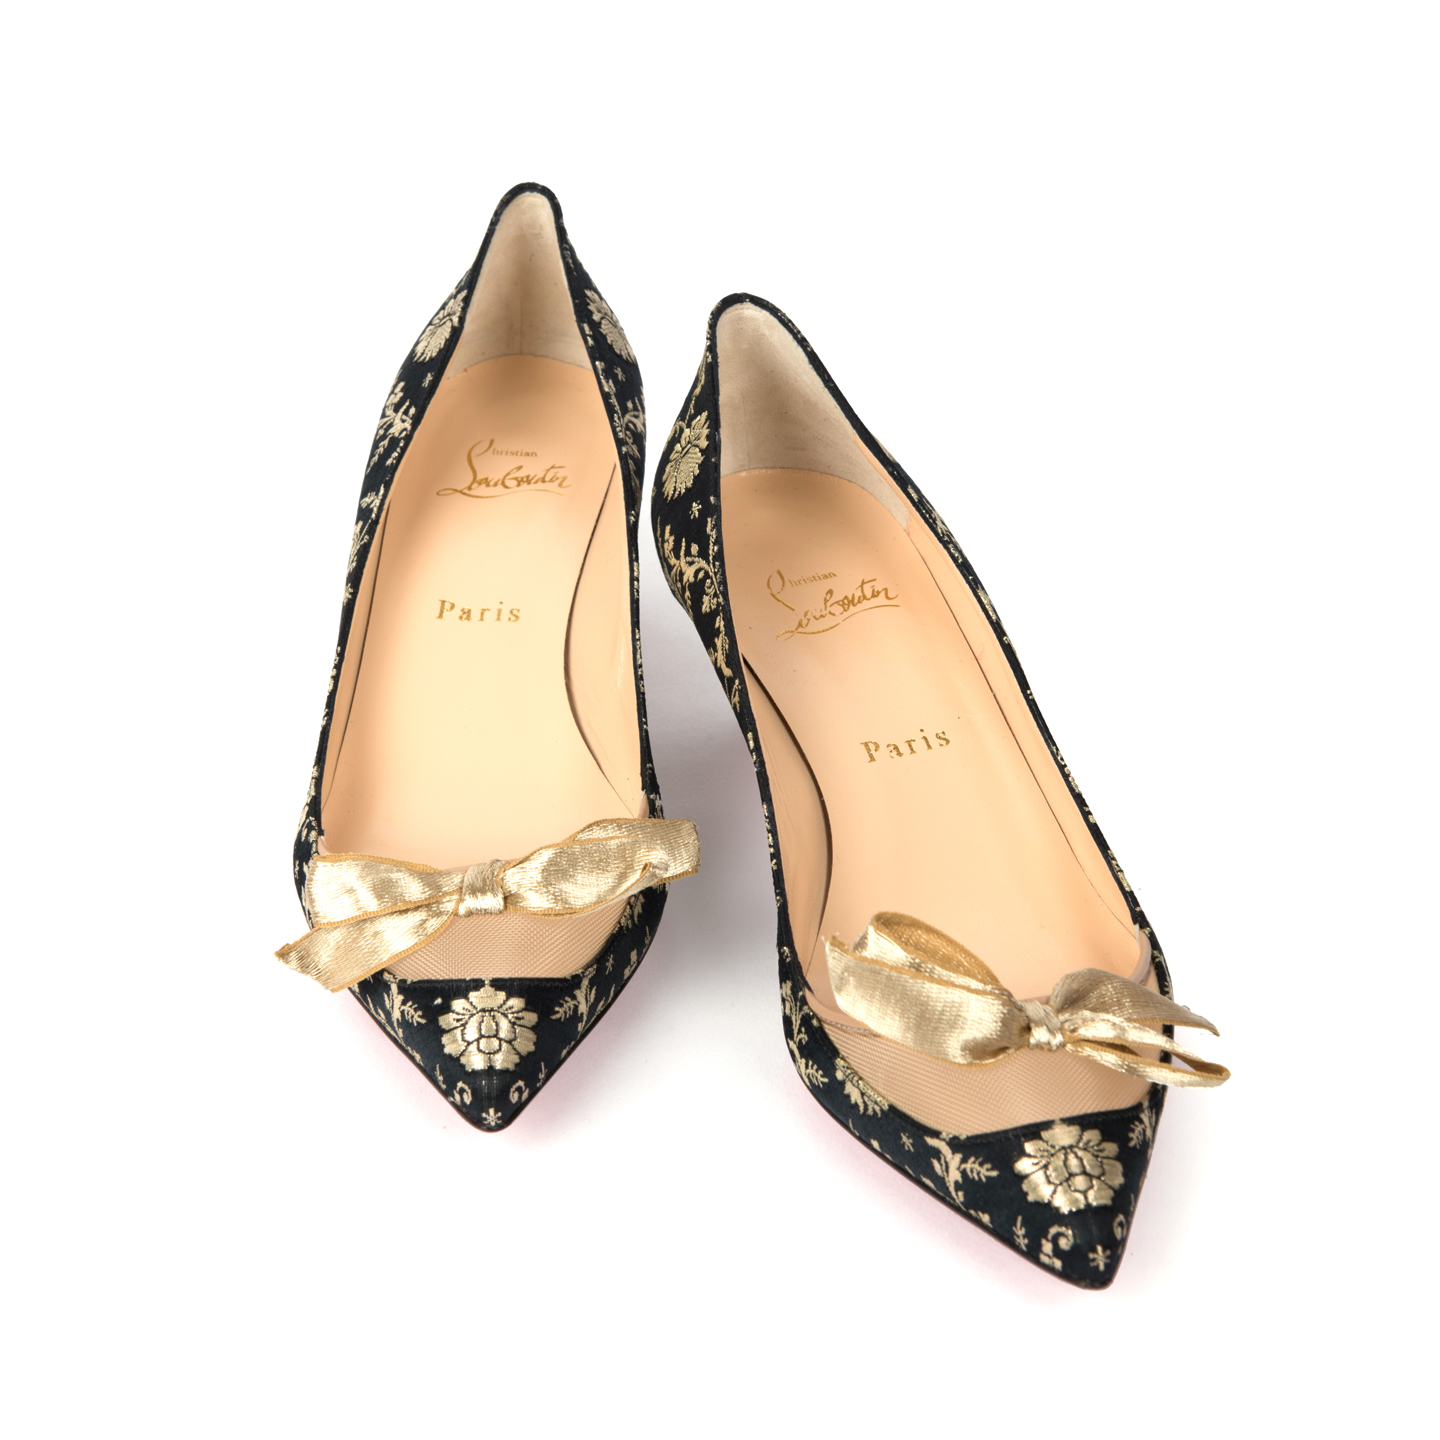 Christian Louboutin “Love Me” 45 Bow Pumps, Size 39 - LabelCentric